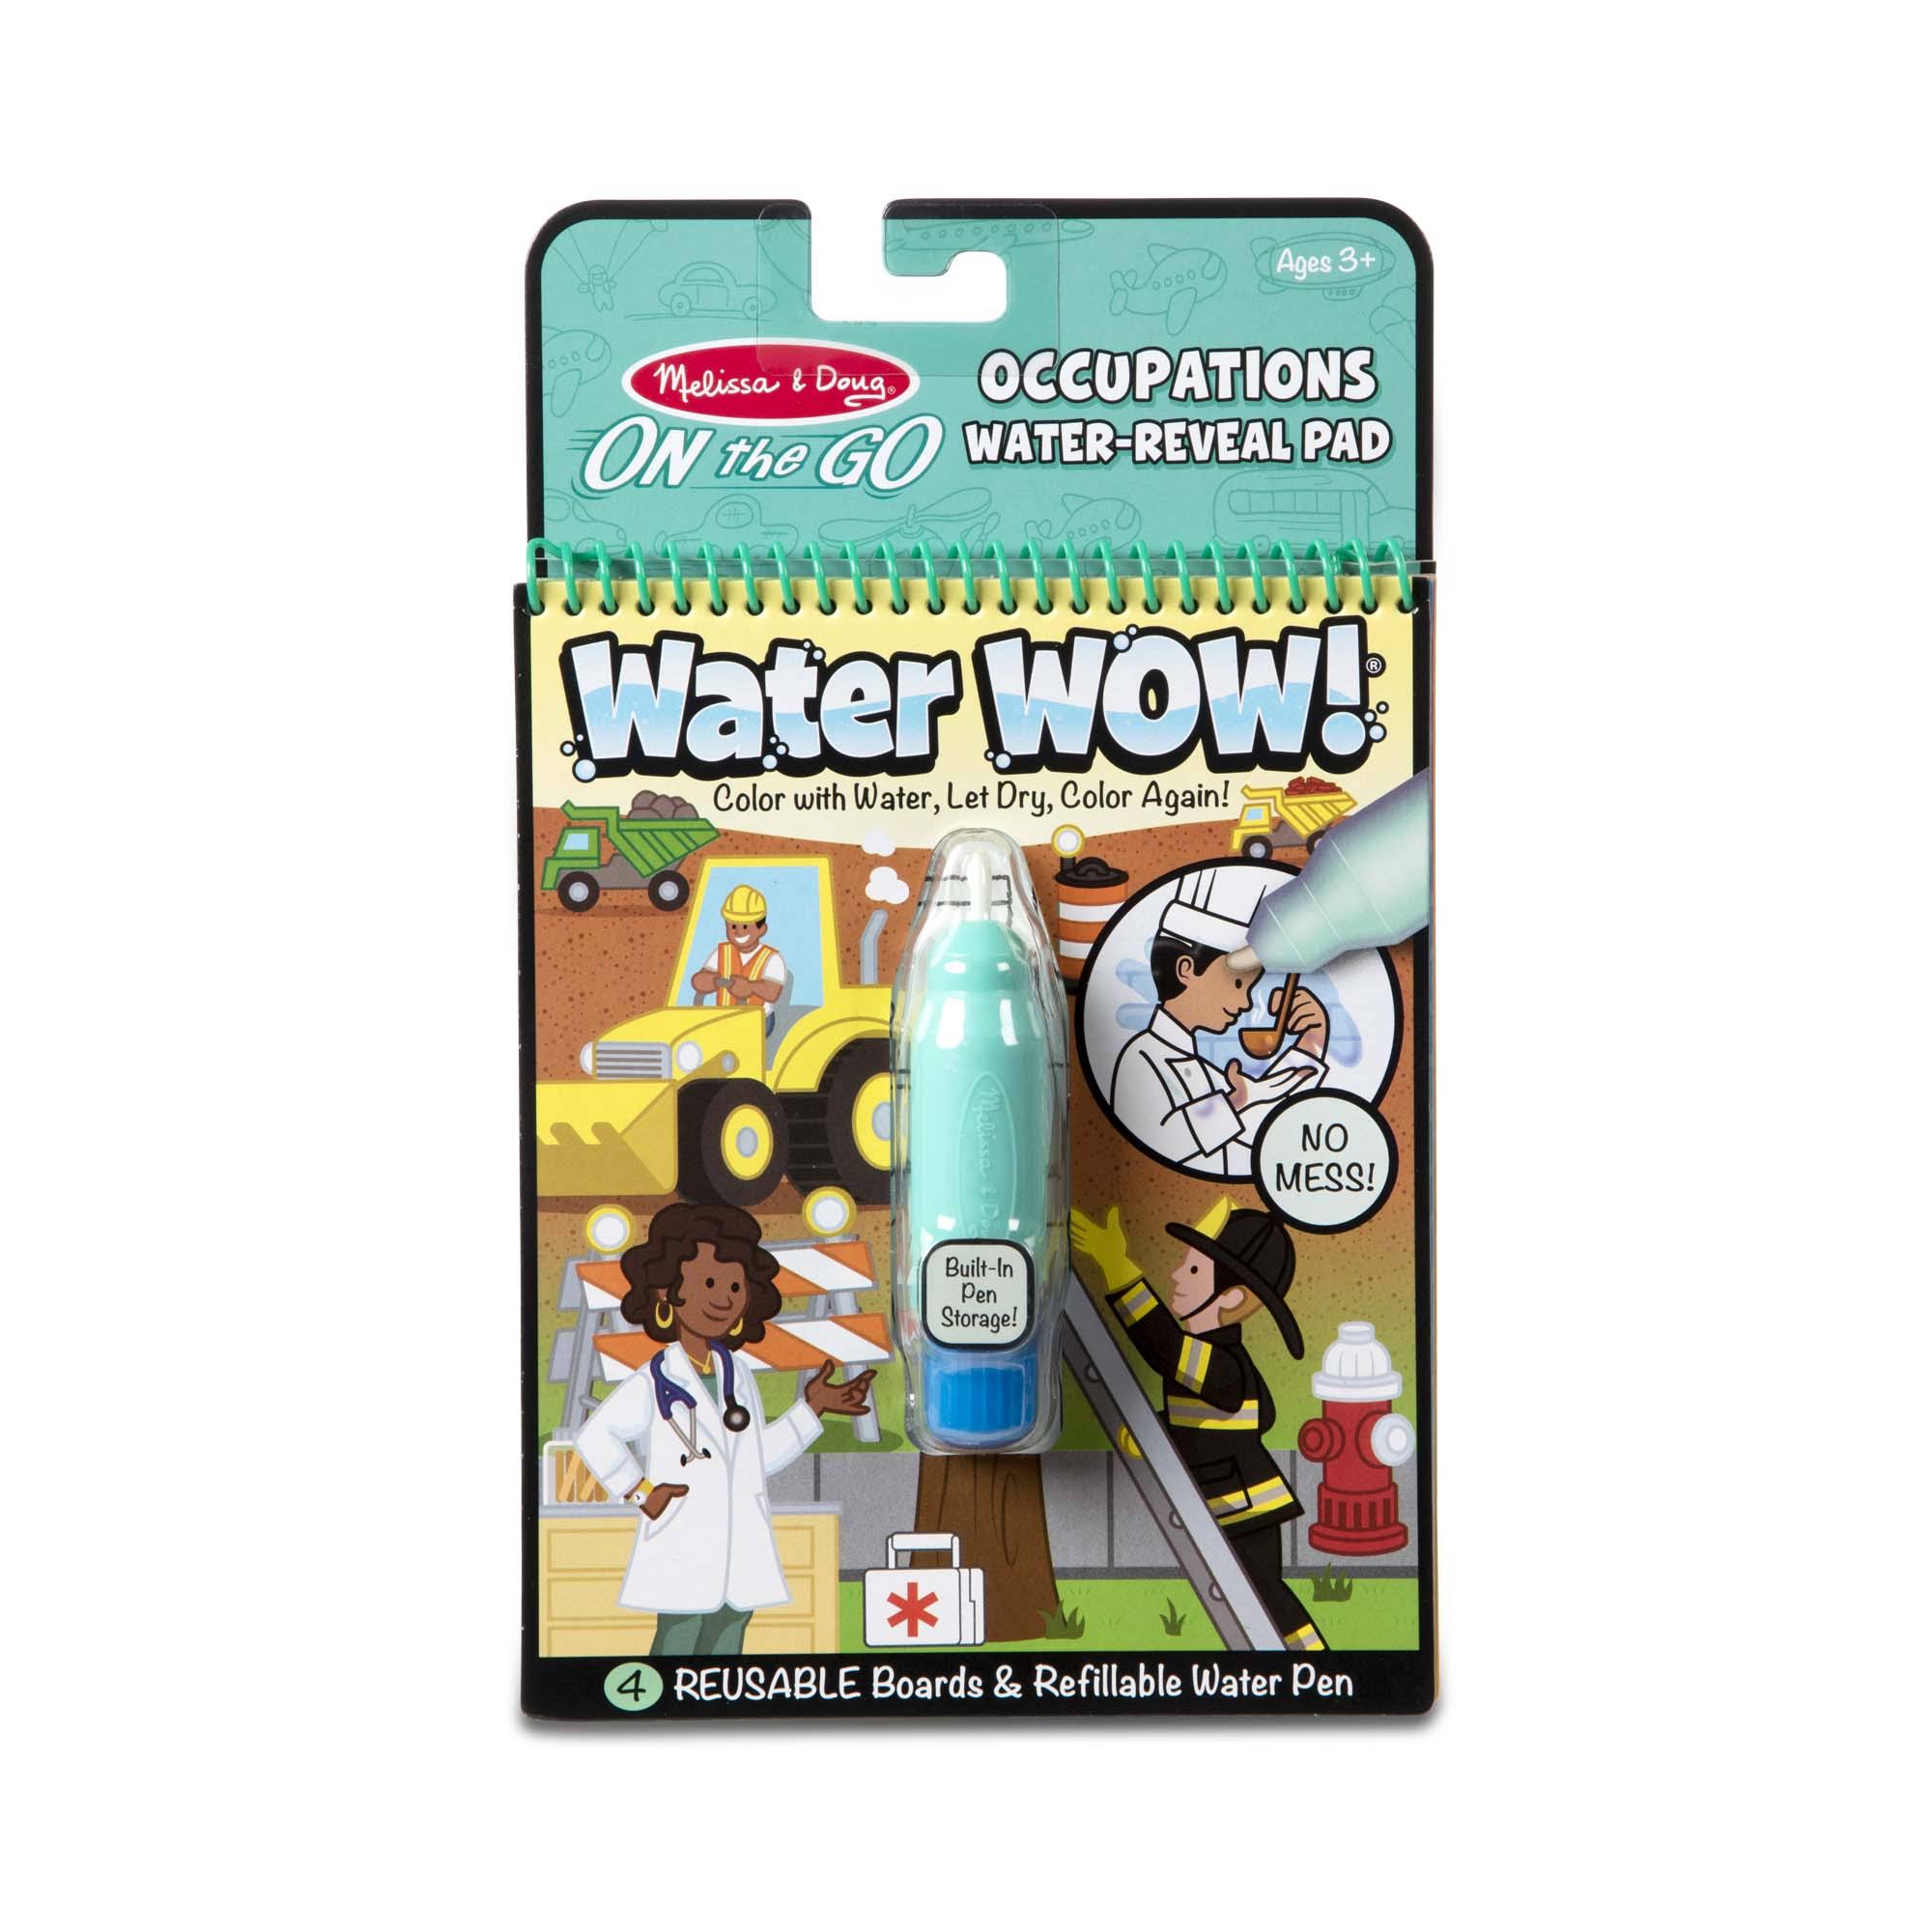 Melissa & Doug on The Go Water Wow! Occupations Water Reveal Pad